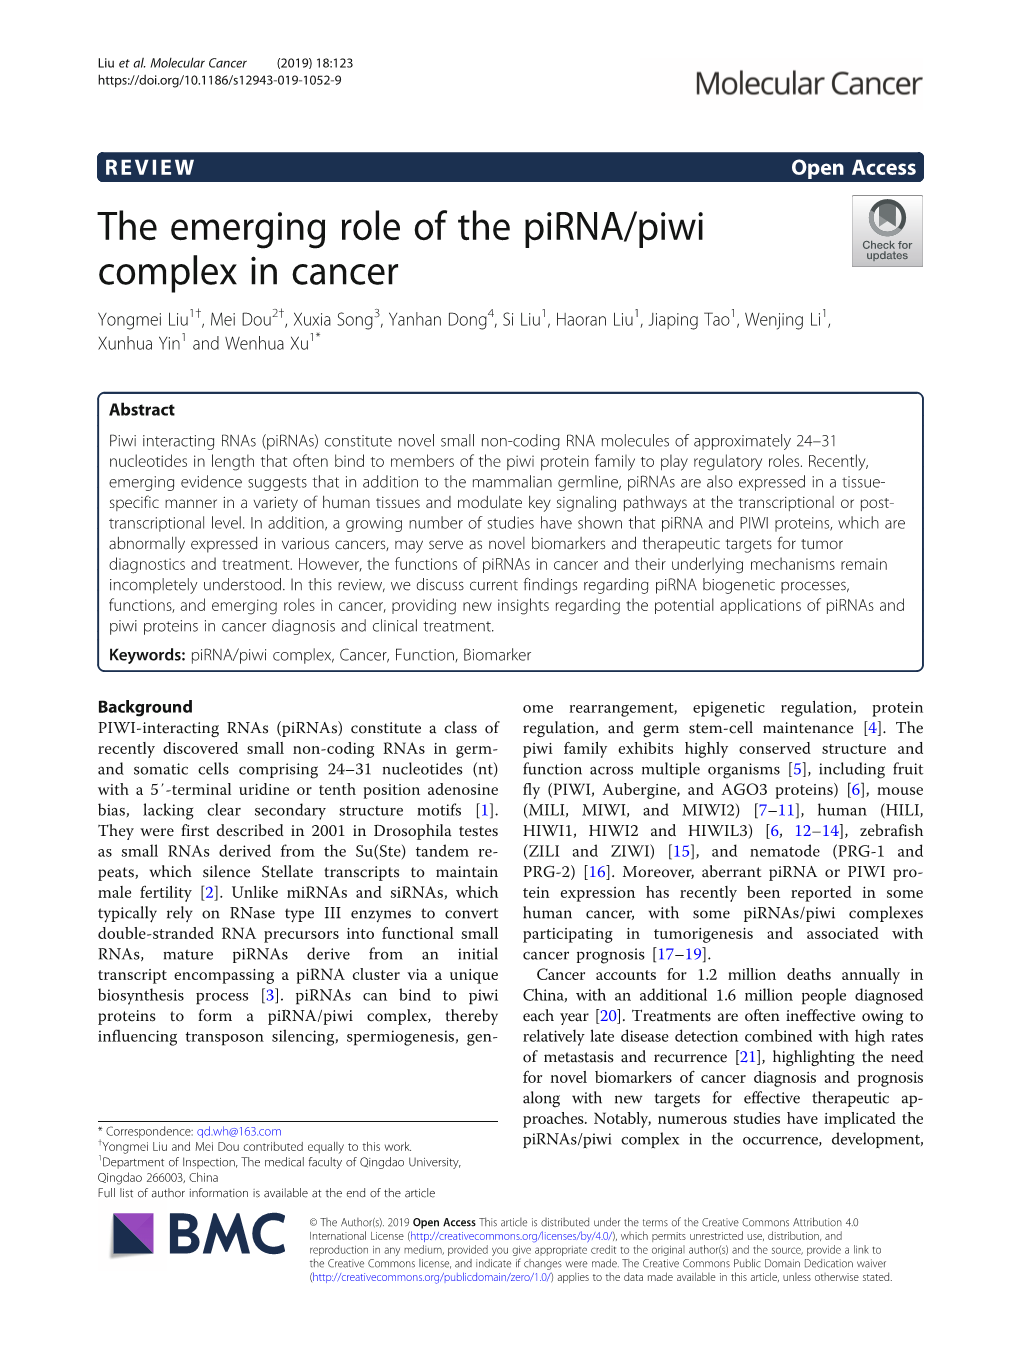 The Emerging Role of the Pirna/Piwi Complex in Cancer